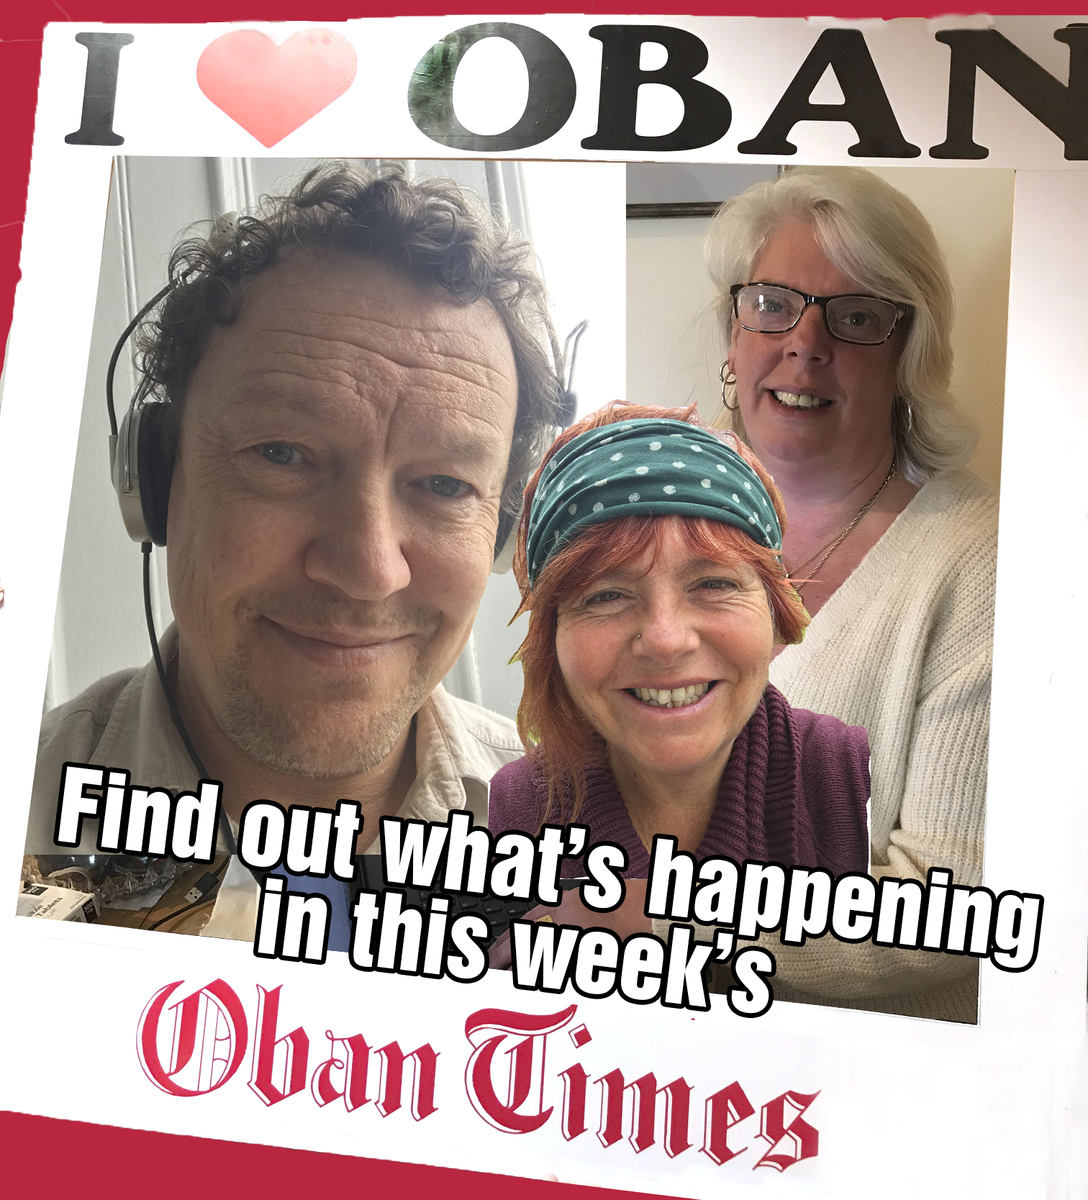 Why local journalism like The Oban Times matters